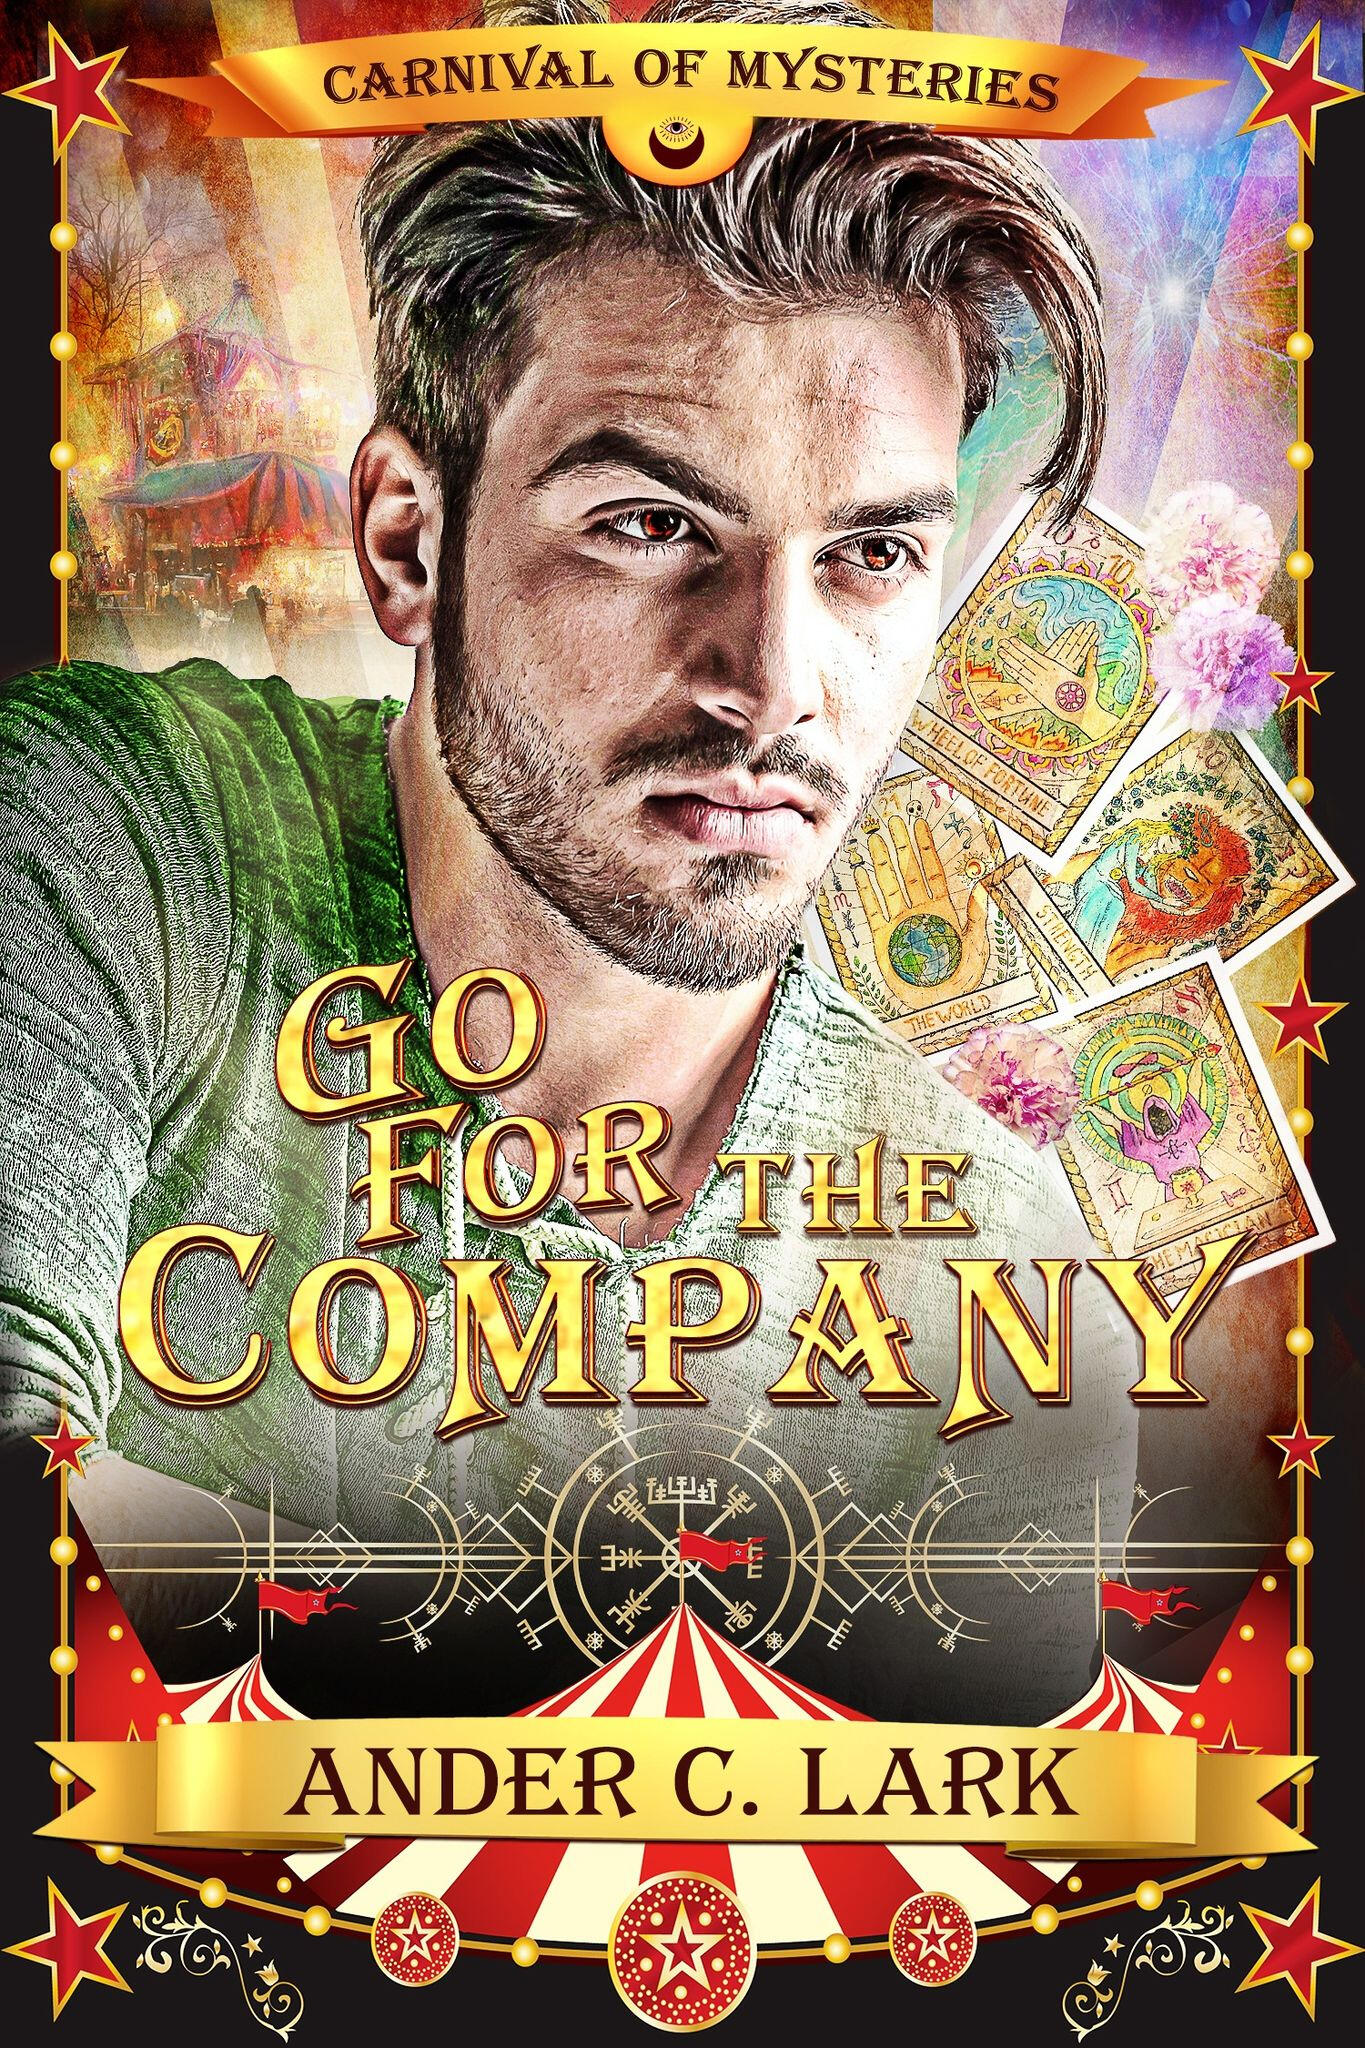 Cover art of Go for the Company, Ander C. Lark's latest book. A man looks of in the distance, surrounded by carnival elements and tarot cards.